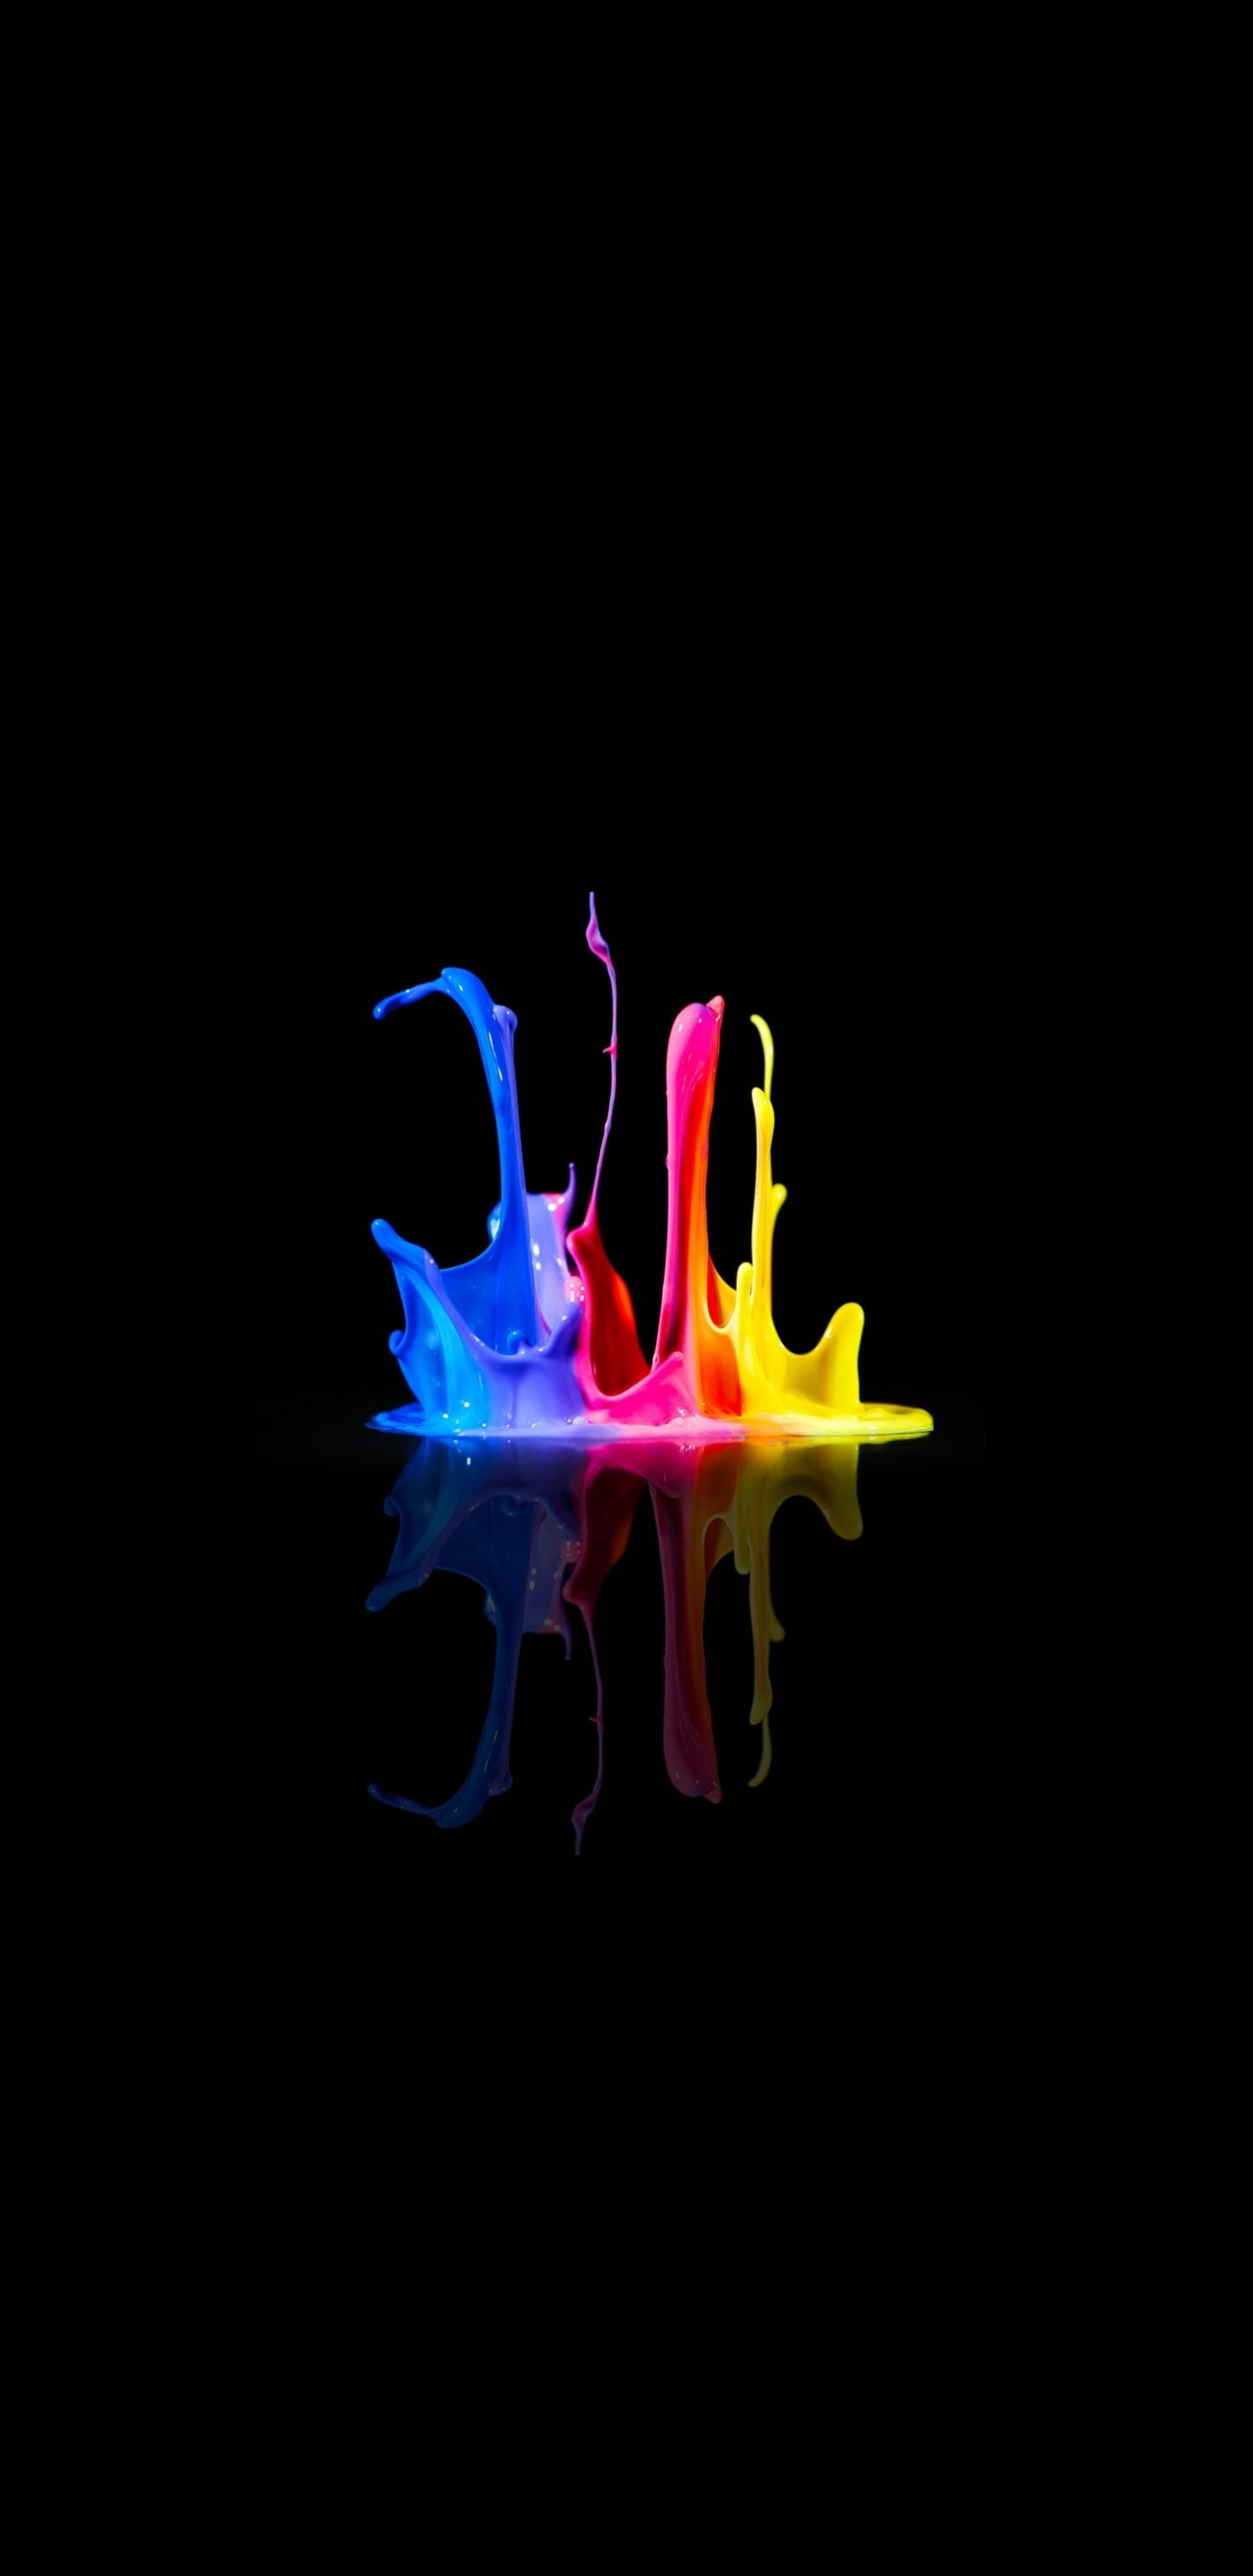 Download wallpaper 1440x2960 paint, drips, lines, abstract, samsung galaxy  s8, samsung galaxy s8 plus, 1440x2960 hd background, 18810